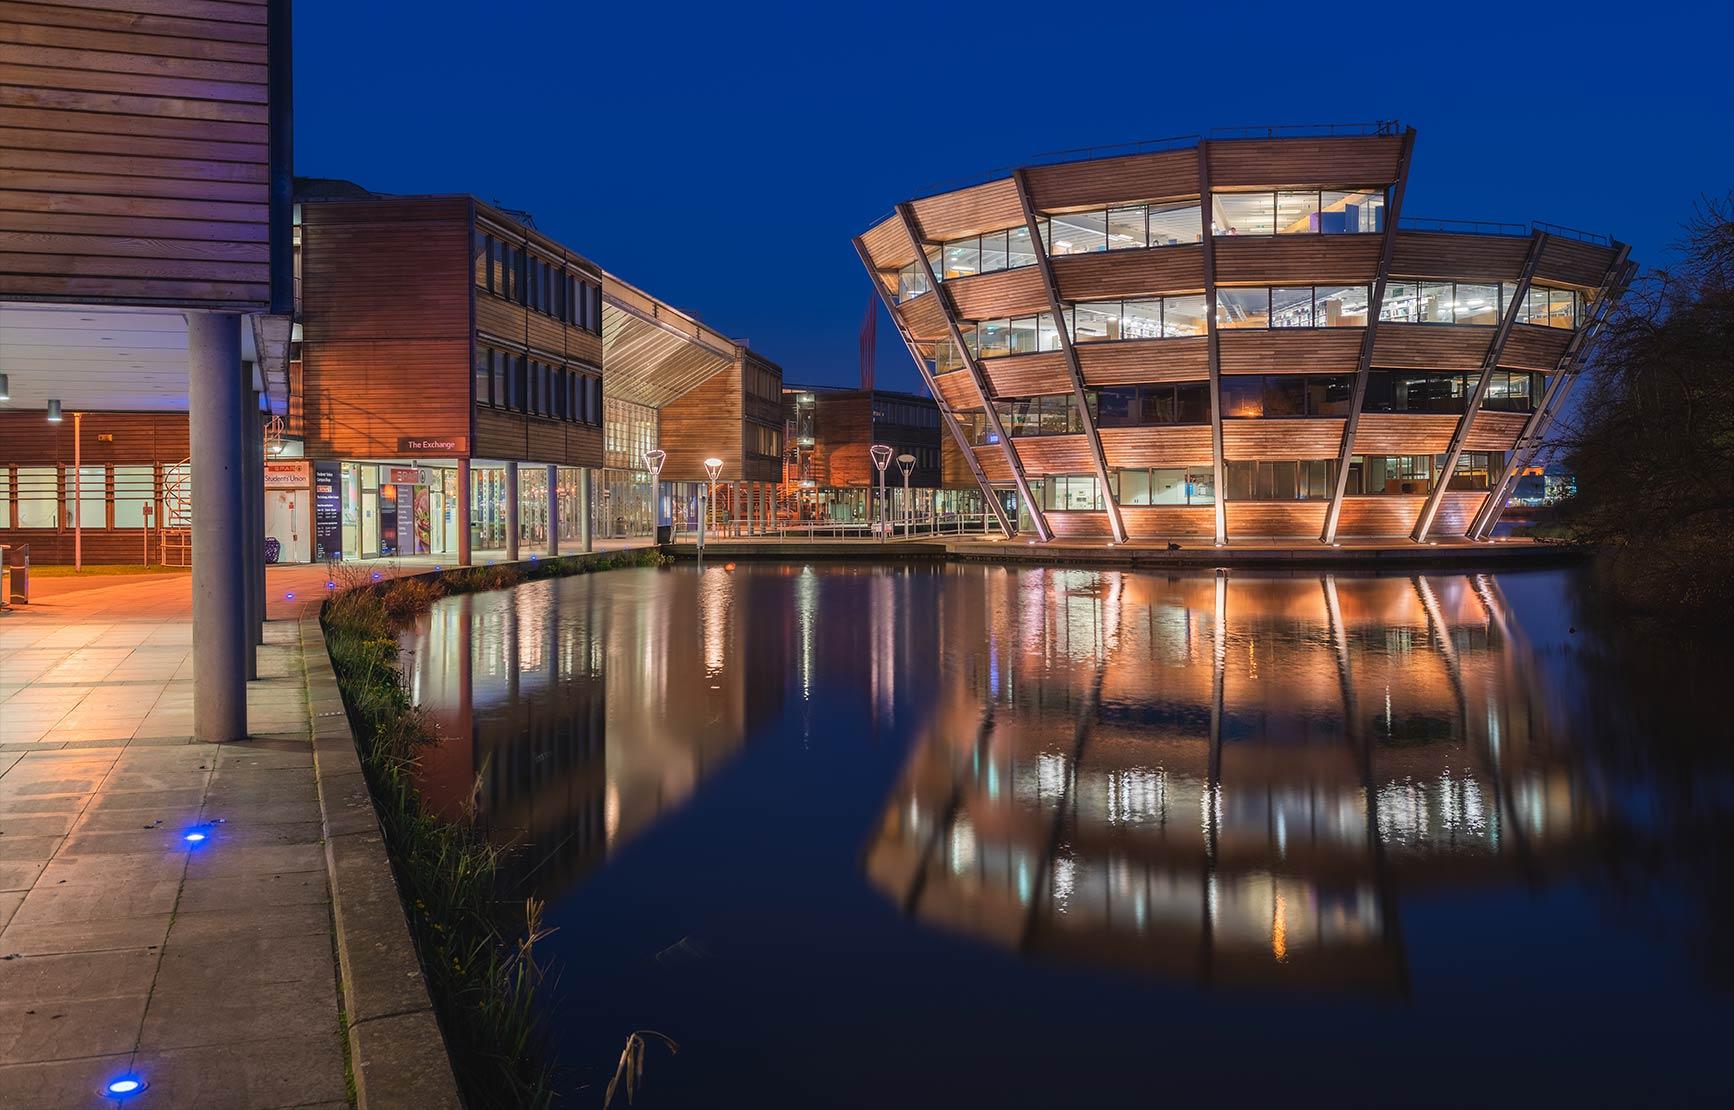 The University of Nottingham Business Building at night.